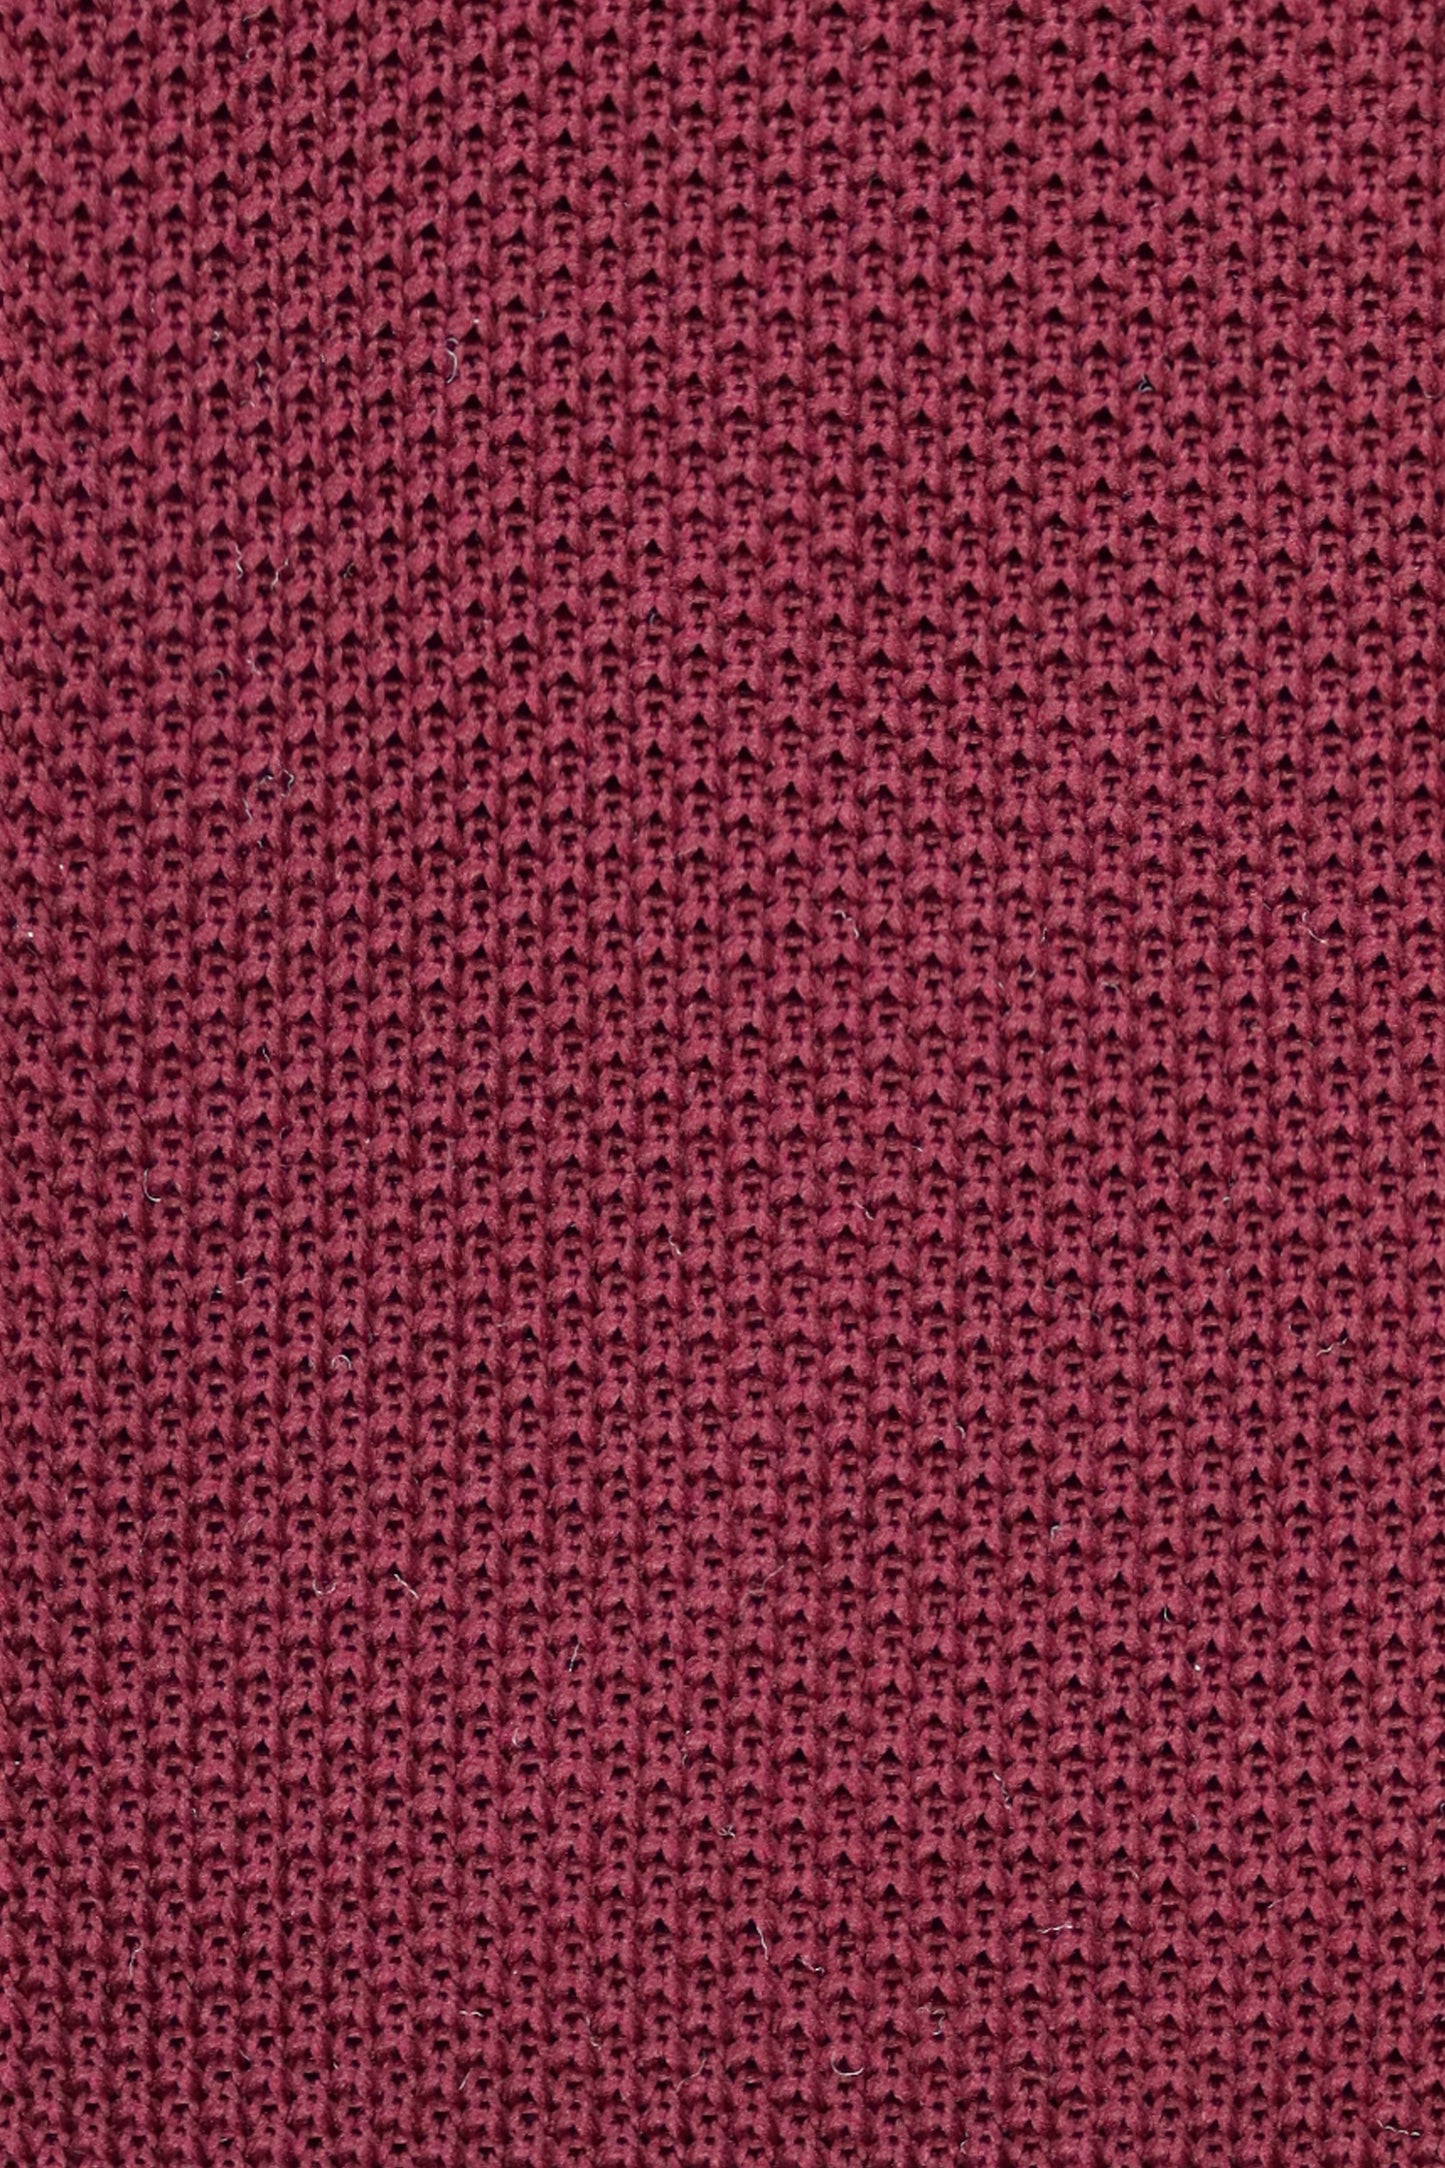 100% Polyester Knitted Pocket Square - Burgundy Red